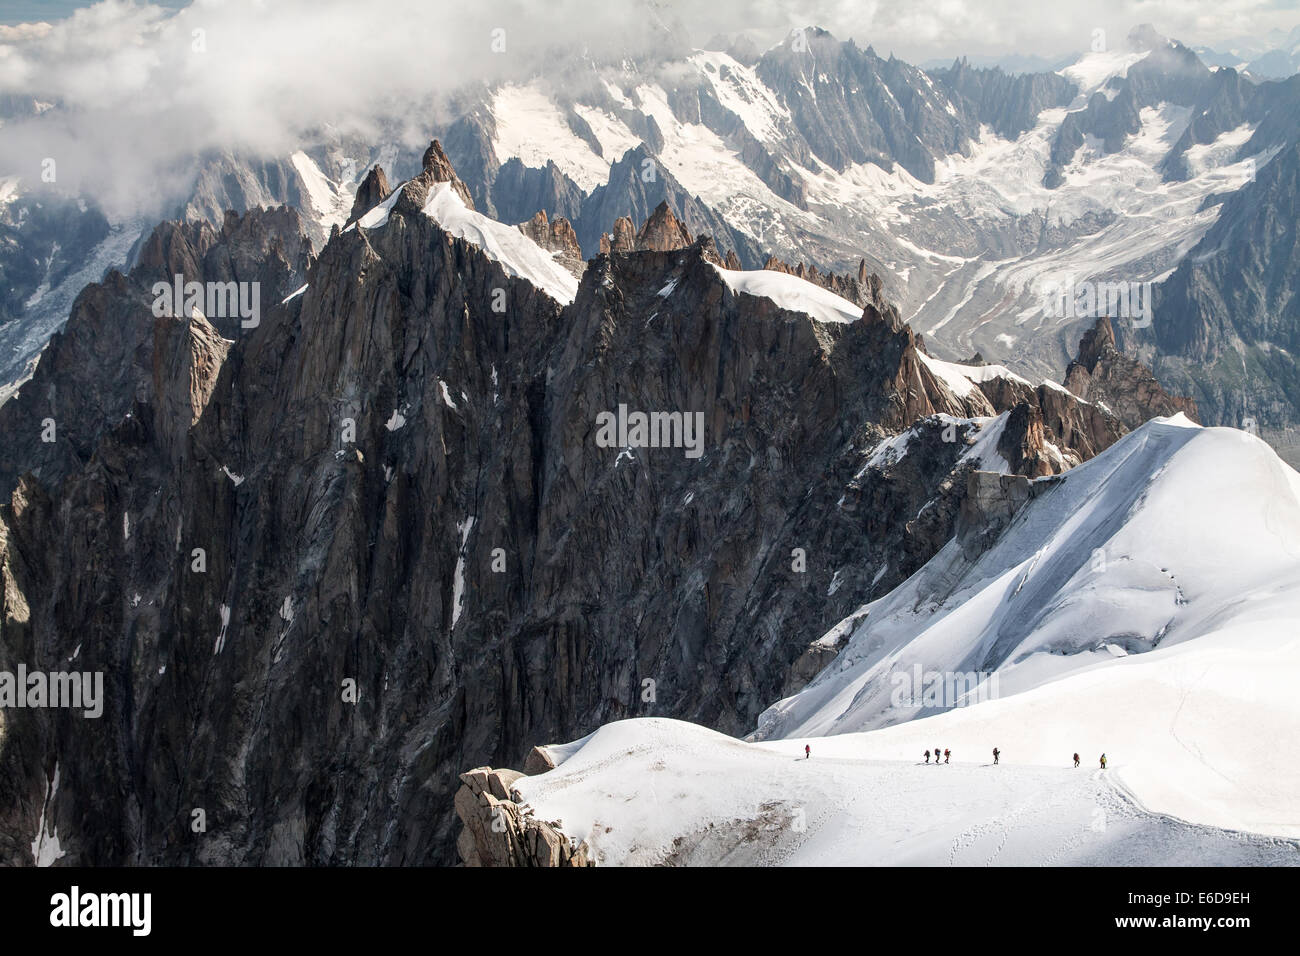 Panorama with a group of hikers climb to the top of Mont Blanc mountain, Aiguille du Midi in France Stock Photo